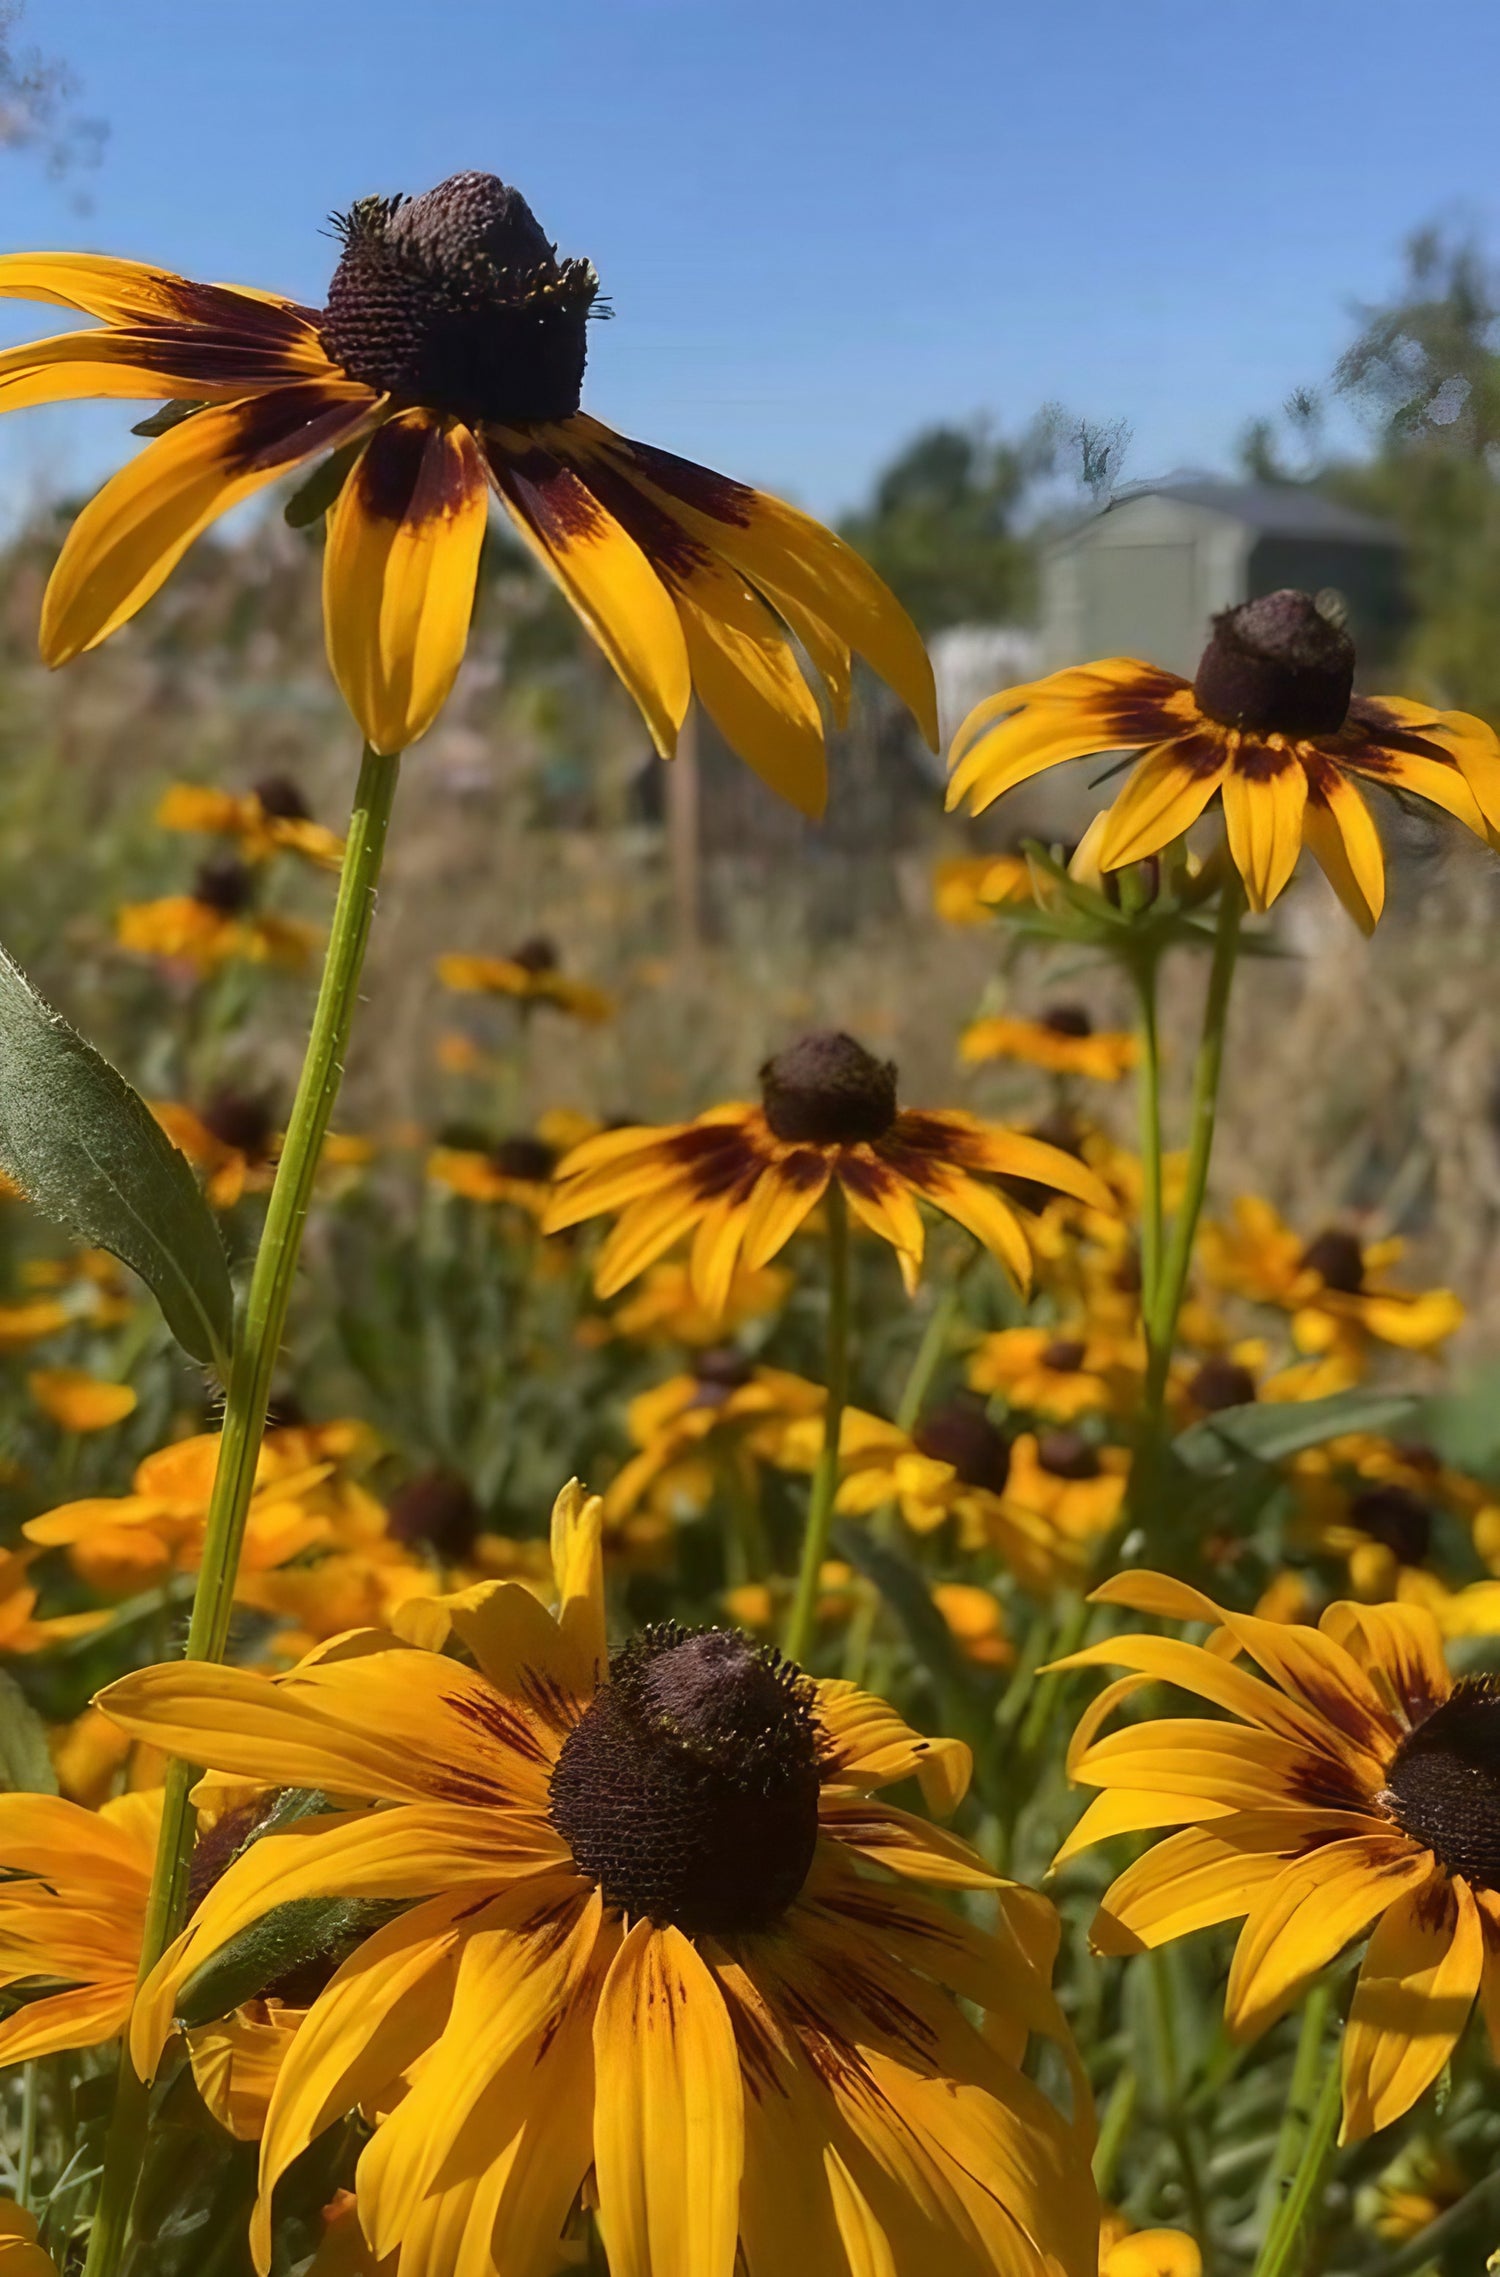 A cluster of Rudbeckia Autumn Forest flowers, commonly known as Black-Eyed Susans, in a natural garden setting